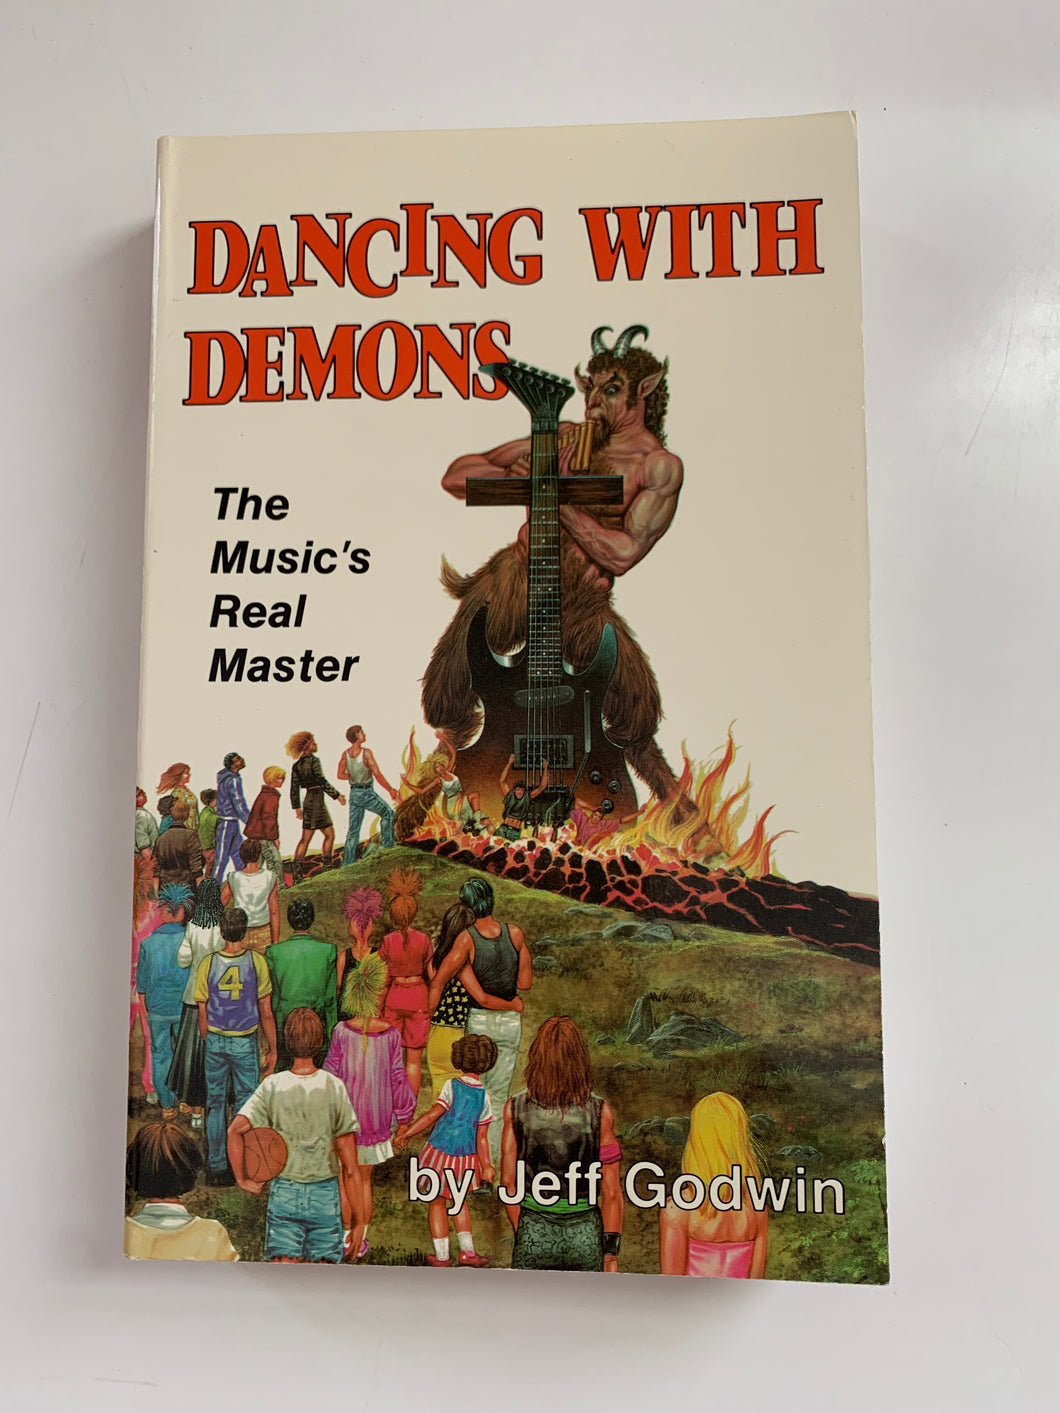 Dancing with Demons: The Music's Real Master by Jeff Godwin